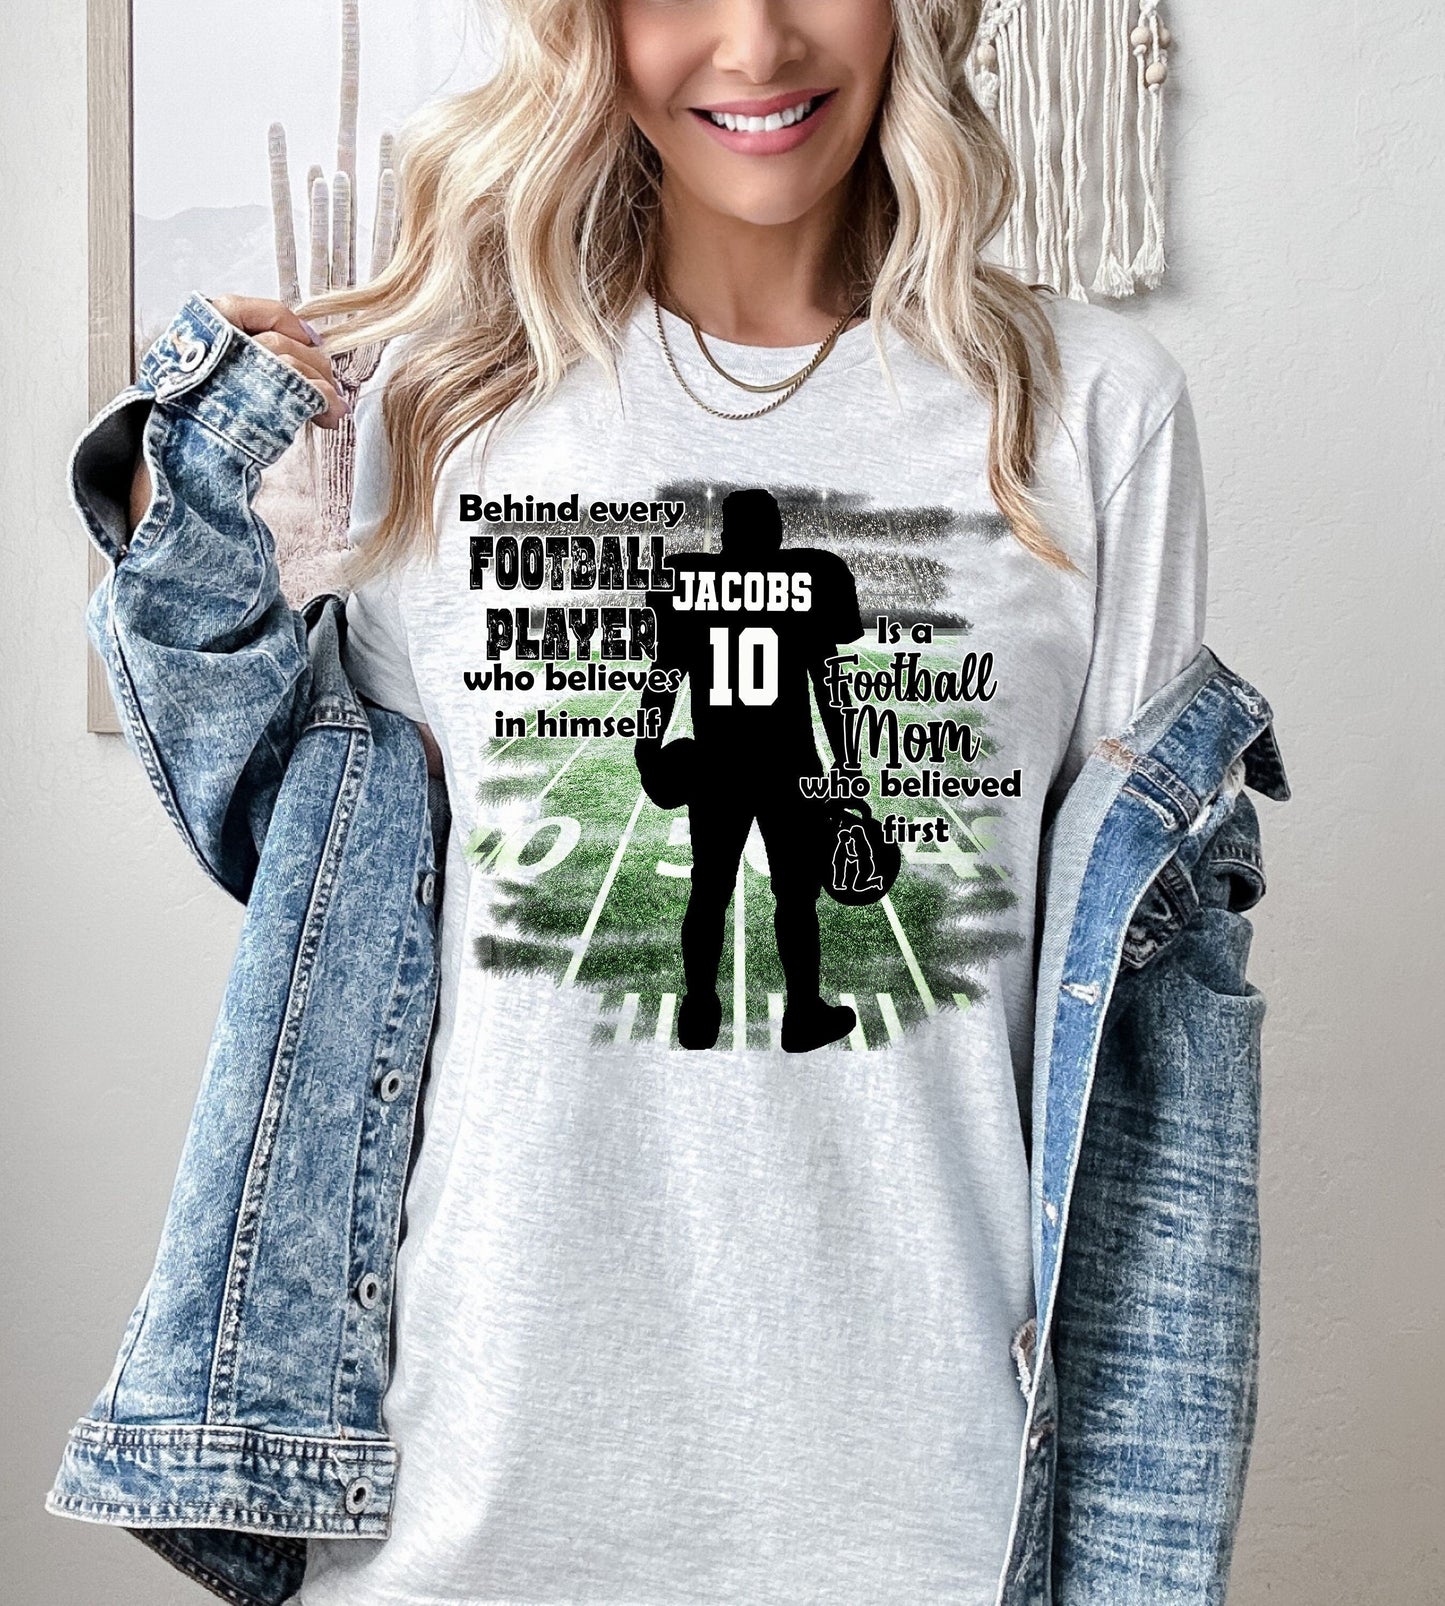 Behind Every Football Player is a Mom Personalized Gildan Softstyle Sweatshirt or T-shirt